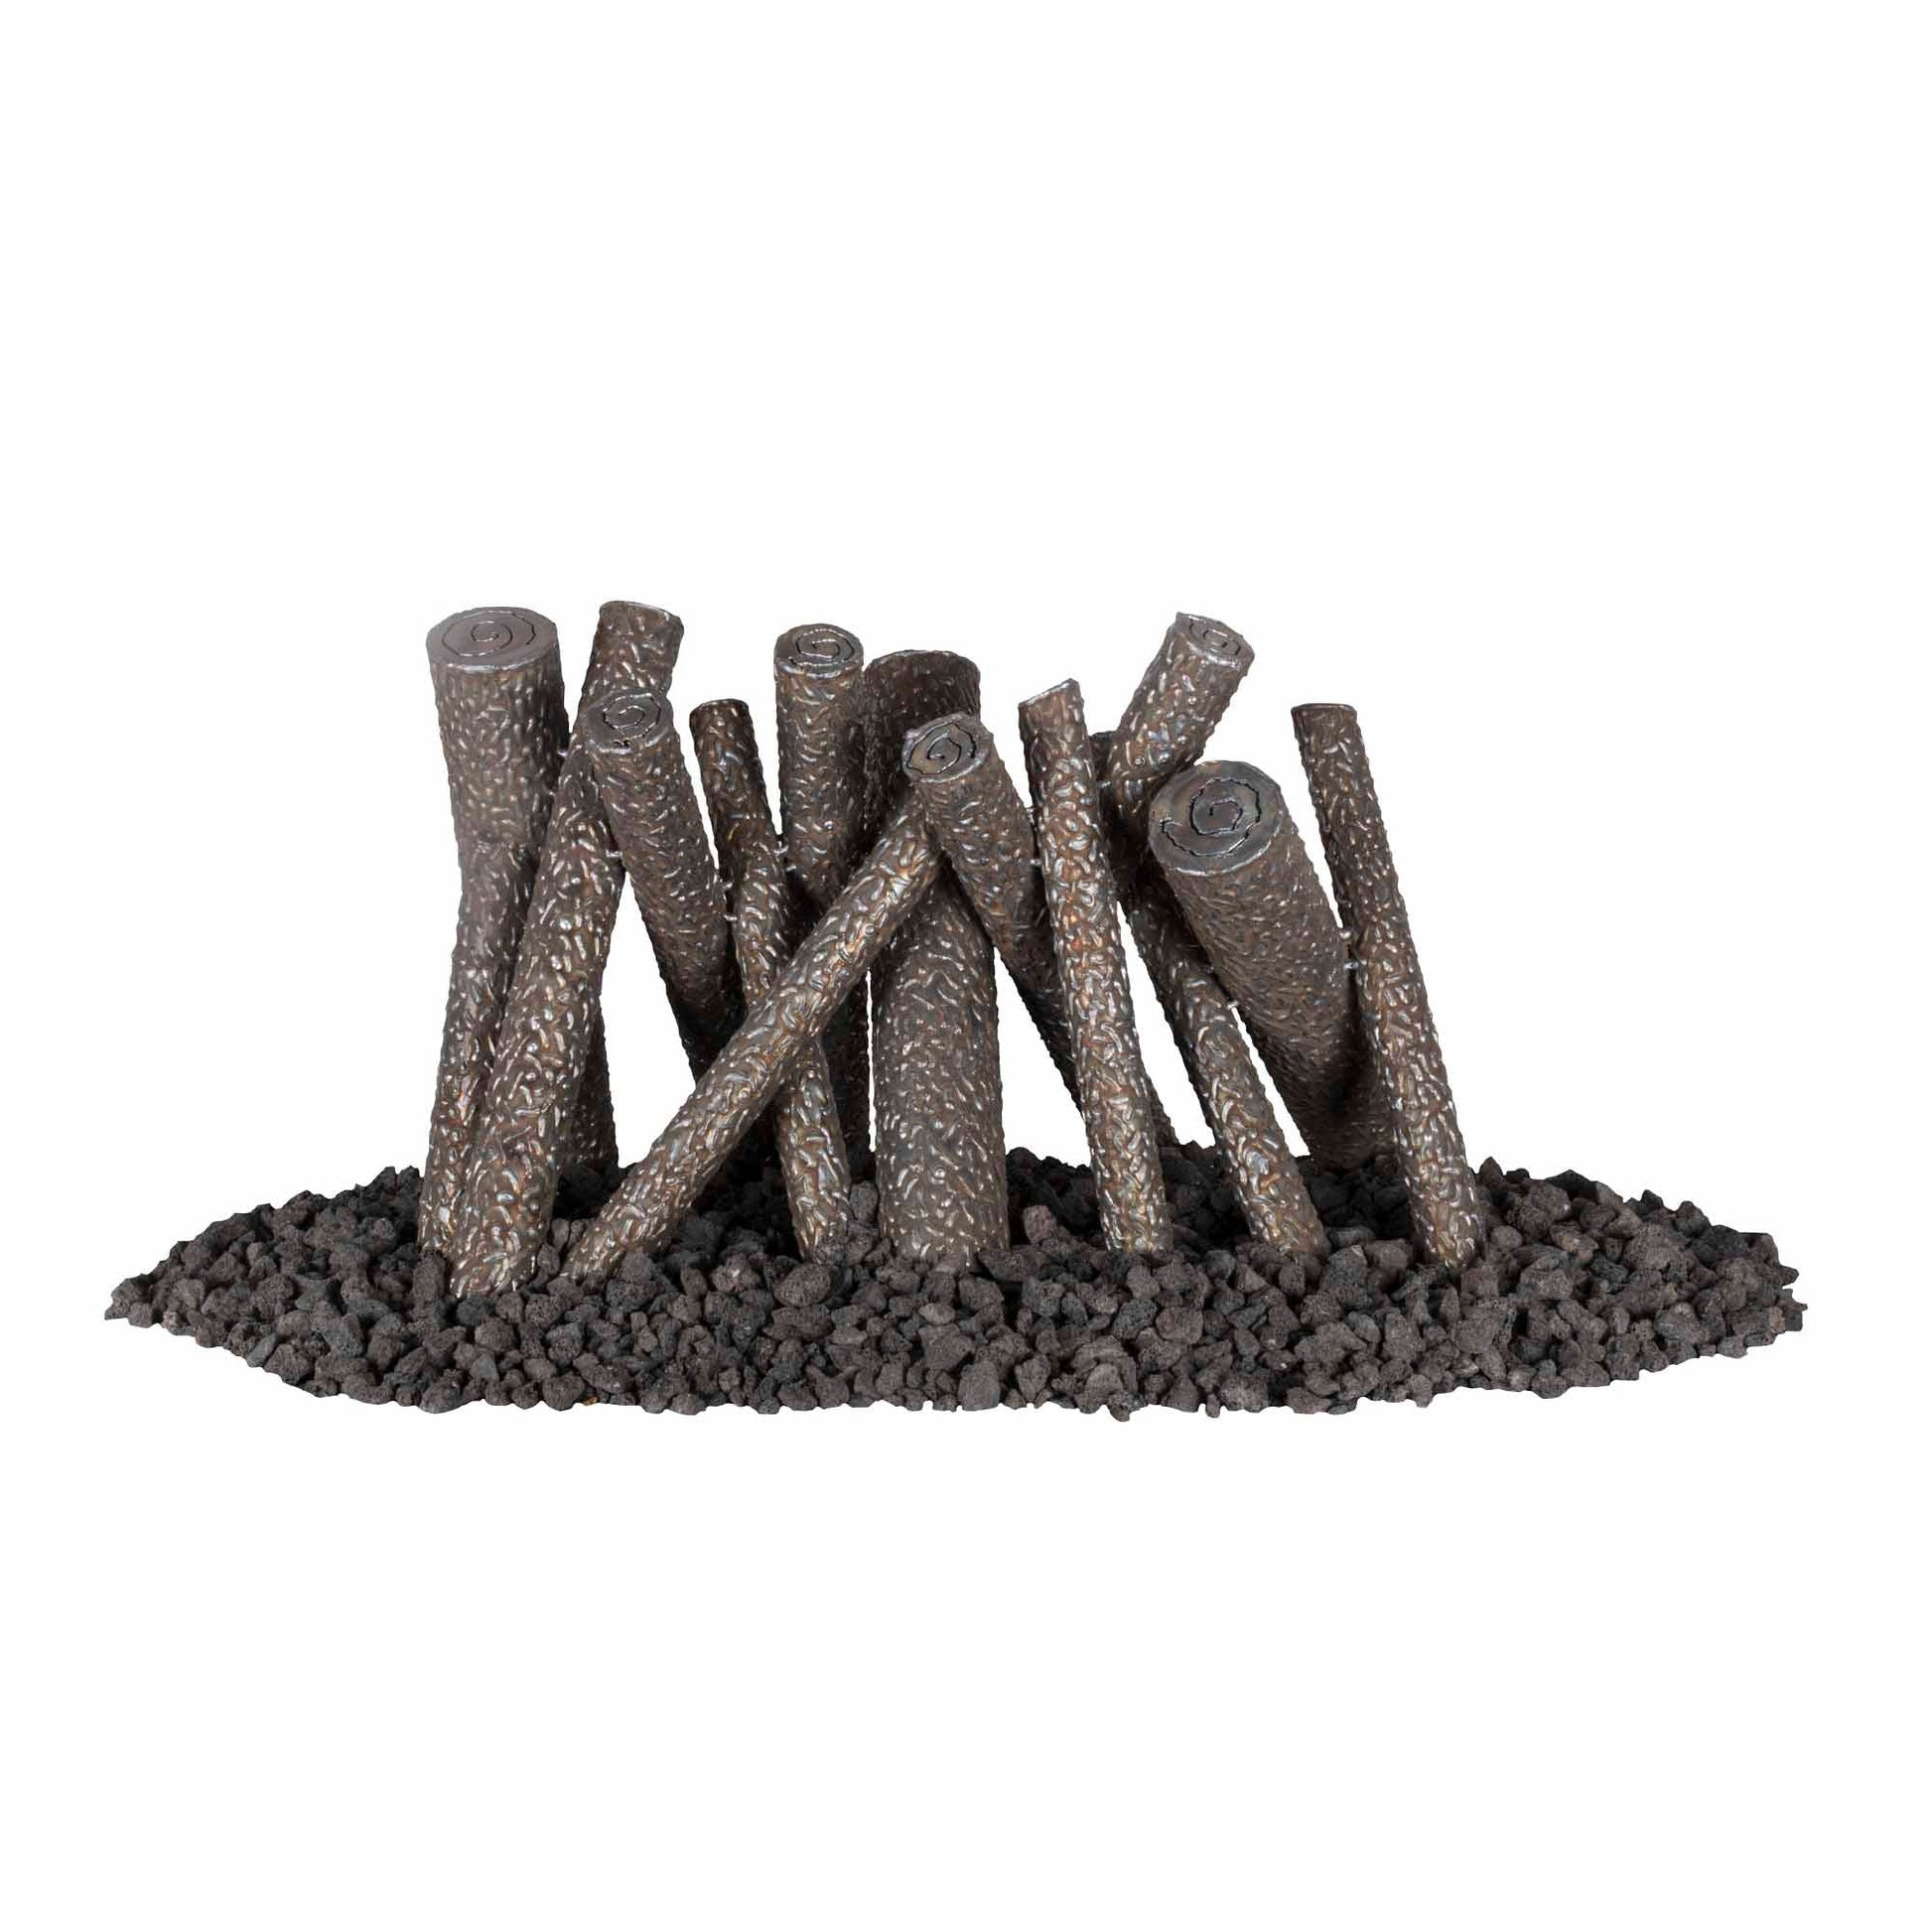 The Outdoor Plus 30" Stainless Steel Upright Logs Ornament